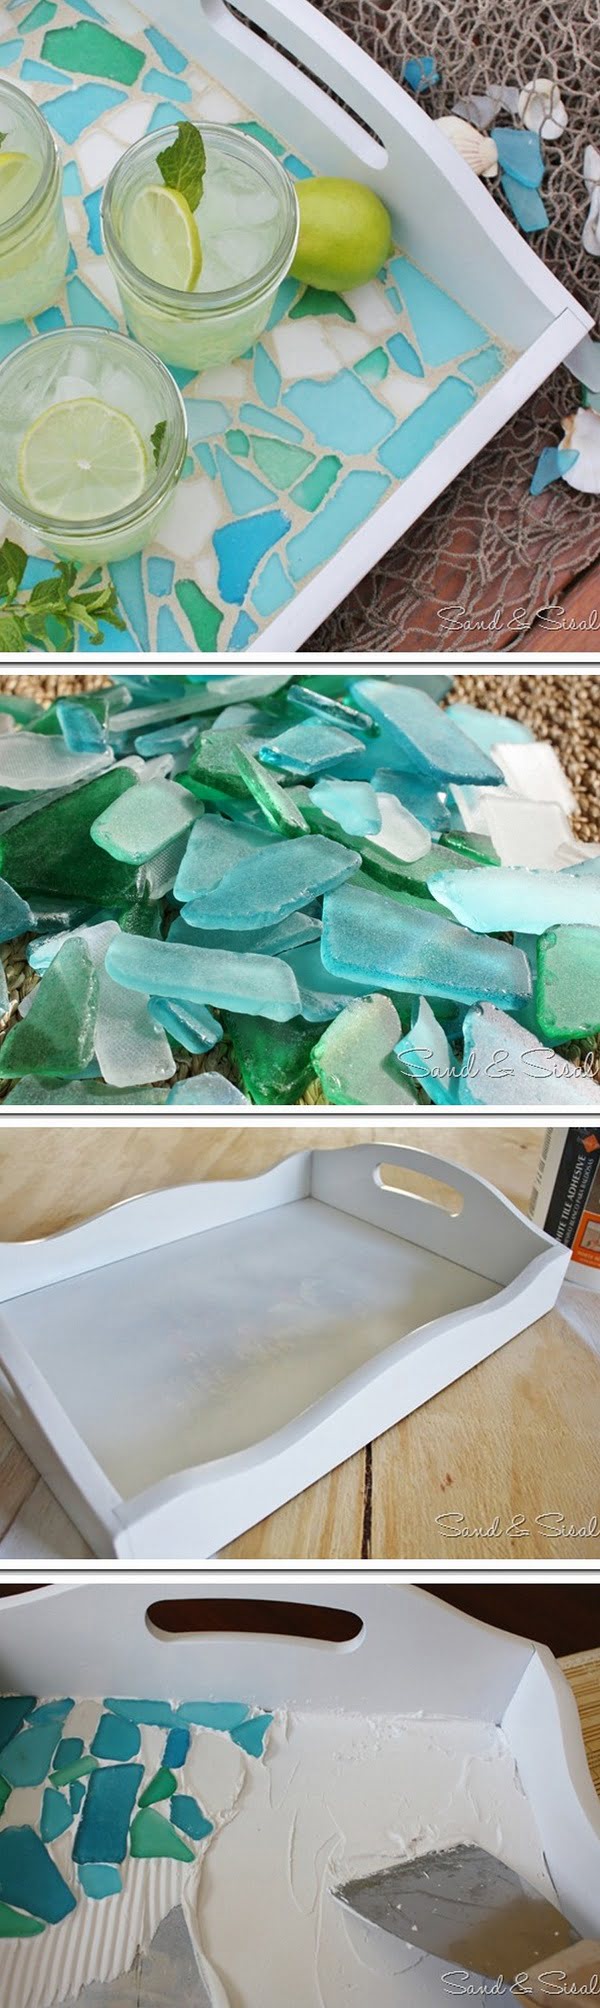 30 Stunning DIY Mosaic Craft Projects for Easy Home Decor - Check out this easy idea on how to make a  sea glass mosaic serving tray for   on a    